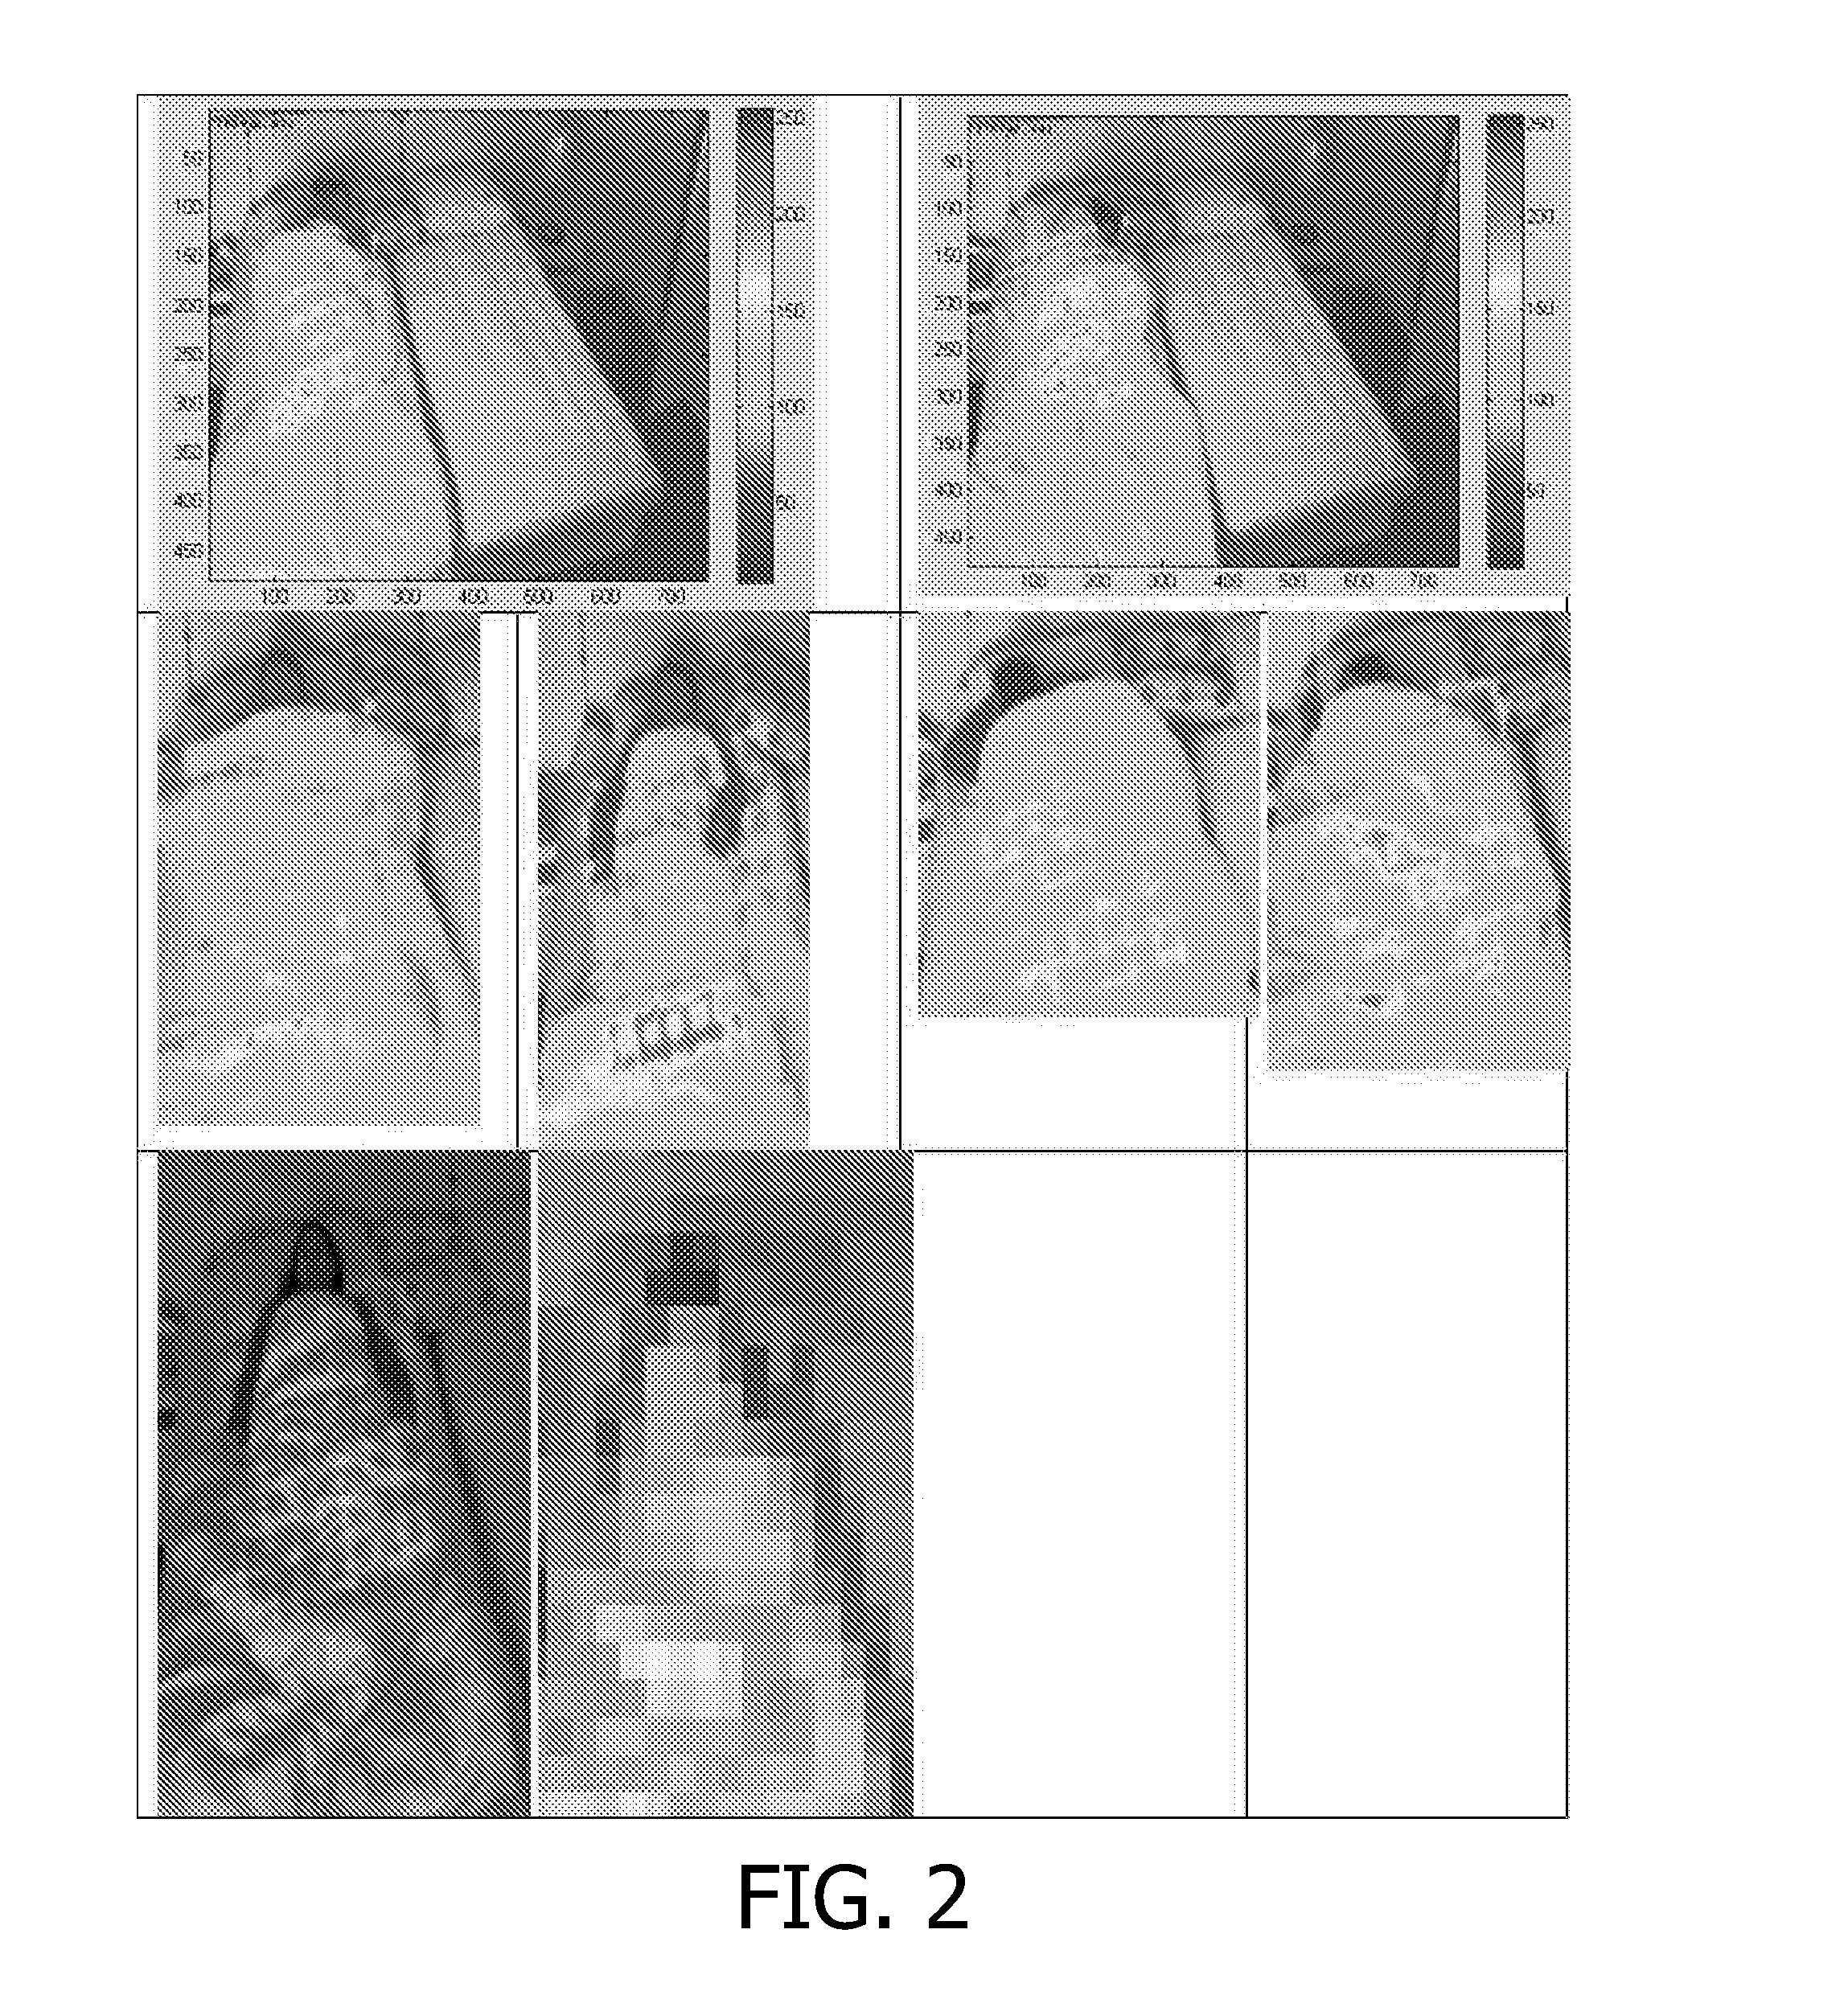 Apparatus and method for the detection of the body position while sleeping